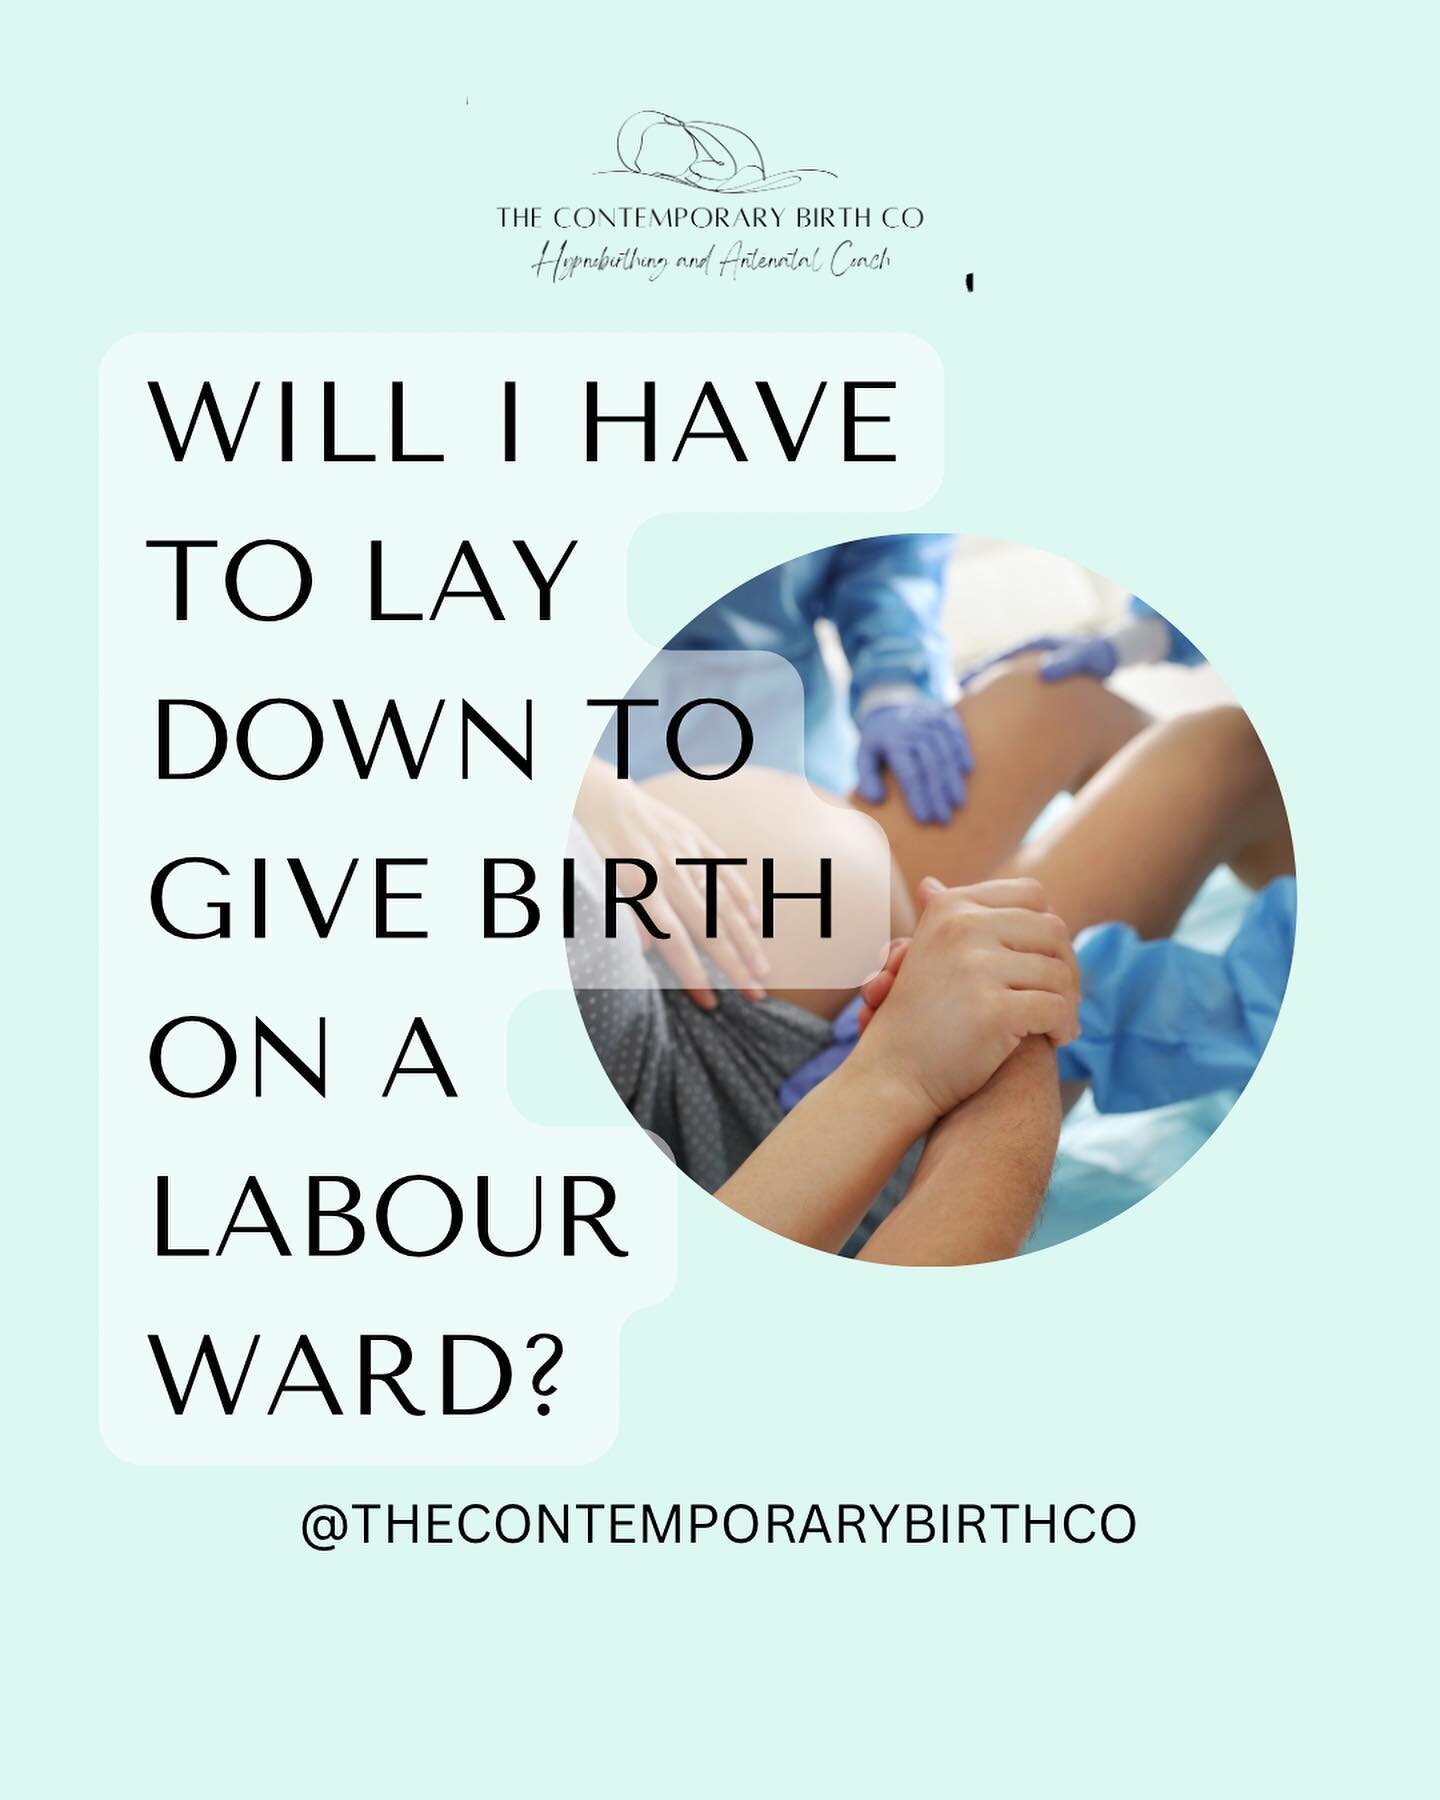 ARE LABOUR WARDS RESTRICTIVE?

- Labour wards are definitely more clinical
- Labour wards feel less comforting
- Labour wards feel less inviting and a little more hostile 
- It can be easy to feel intimidated 

However...
You CAN make it what you nee